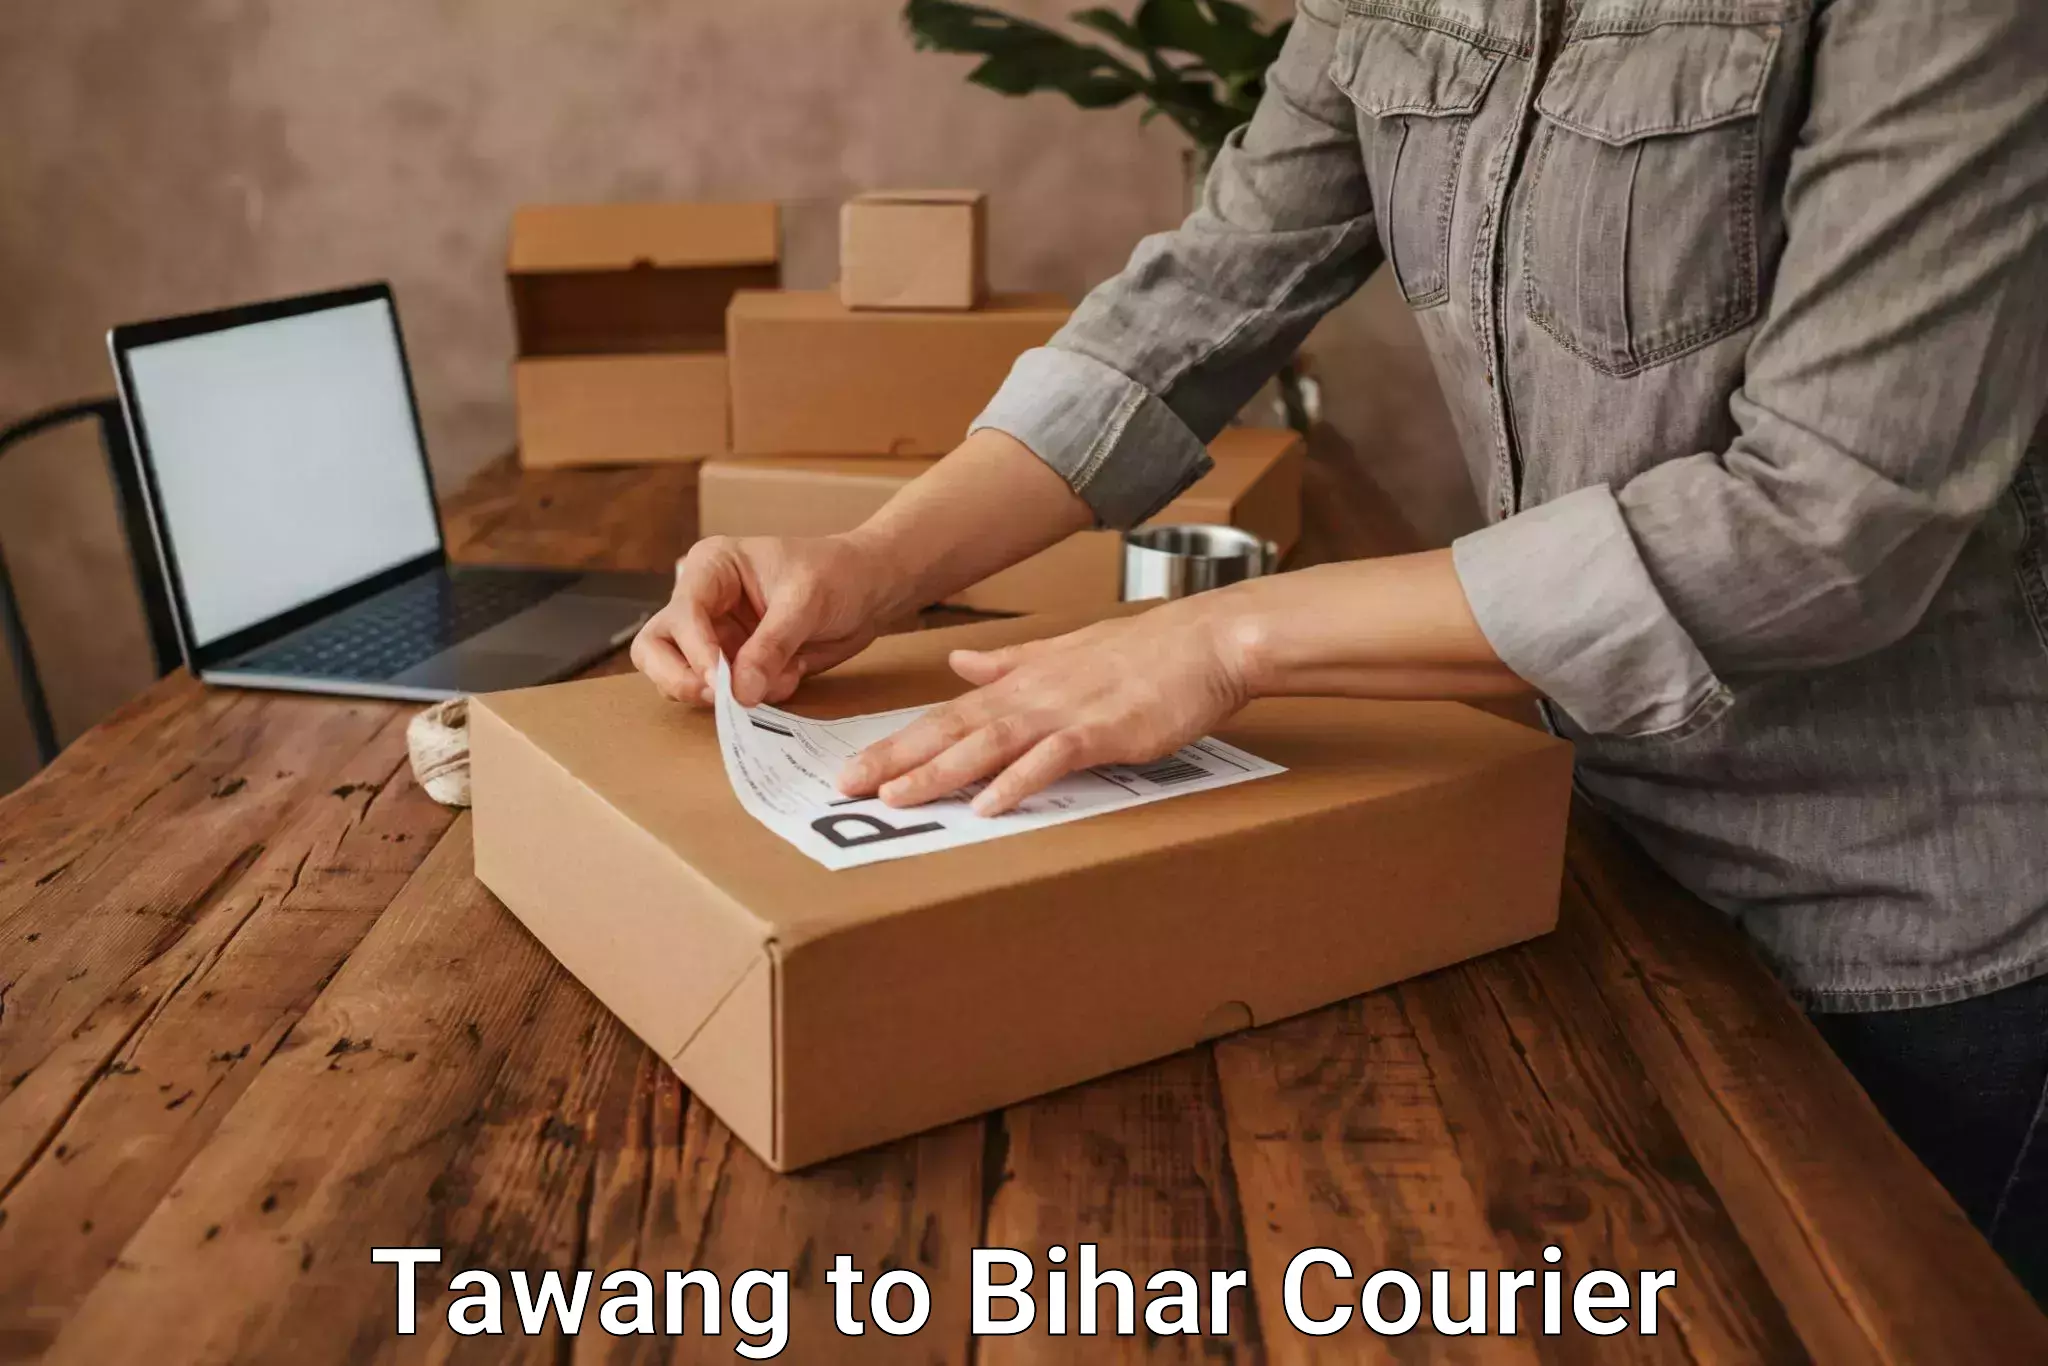 State-of-the-art courier technology Tawang to Hazrat Jandaha